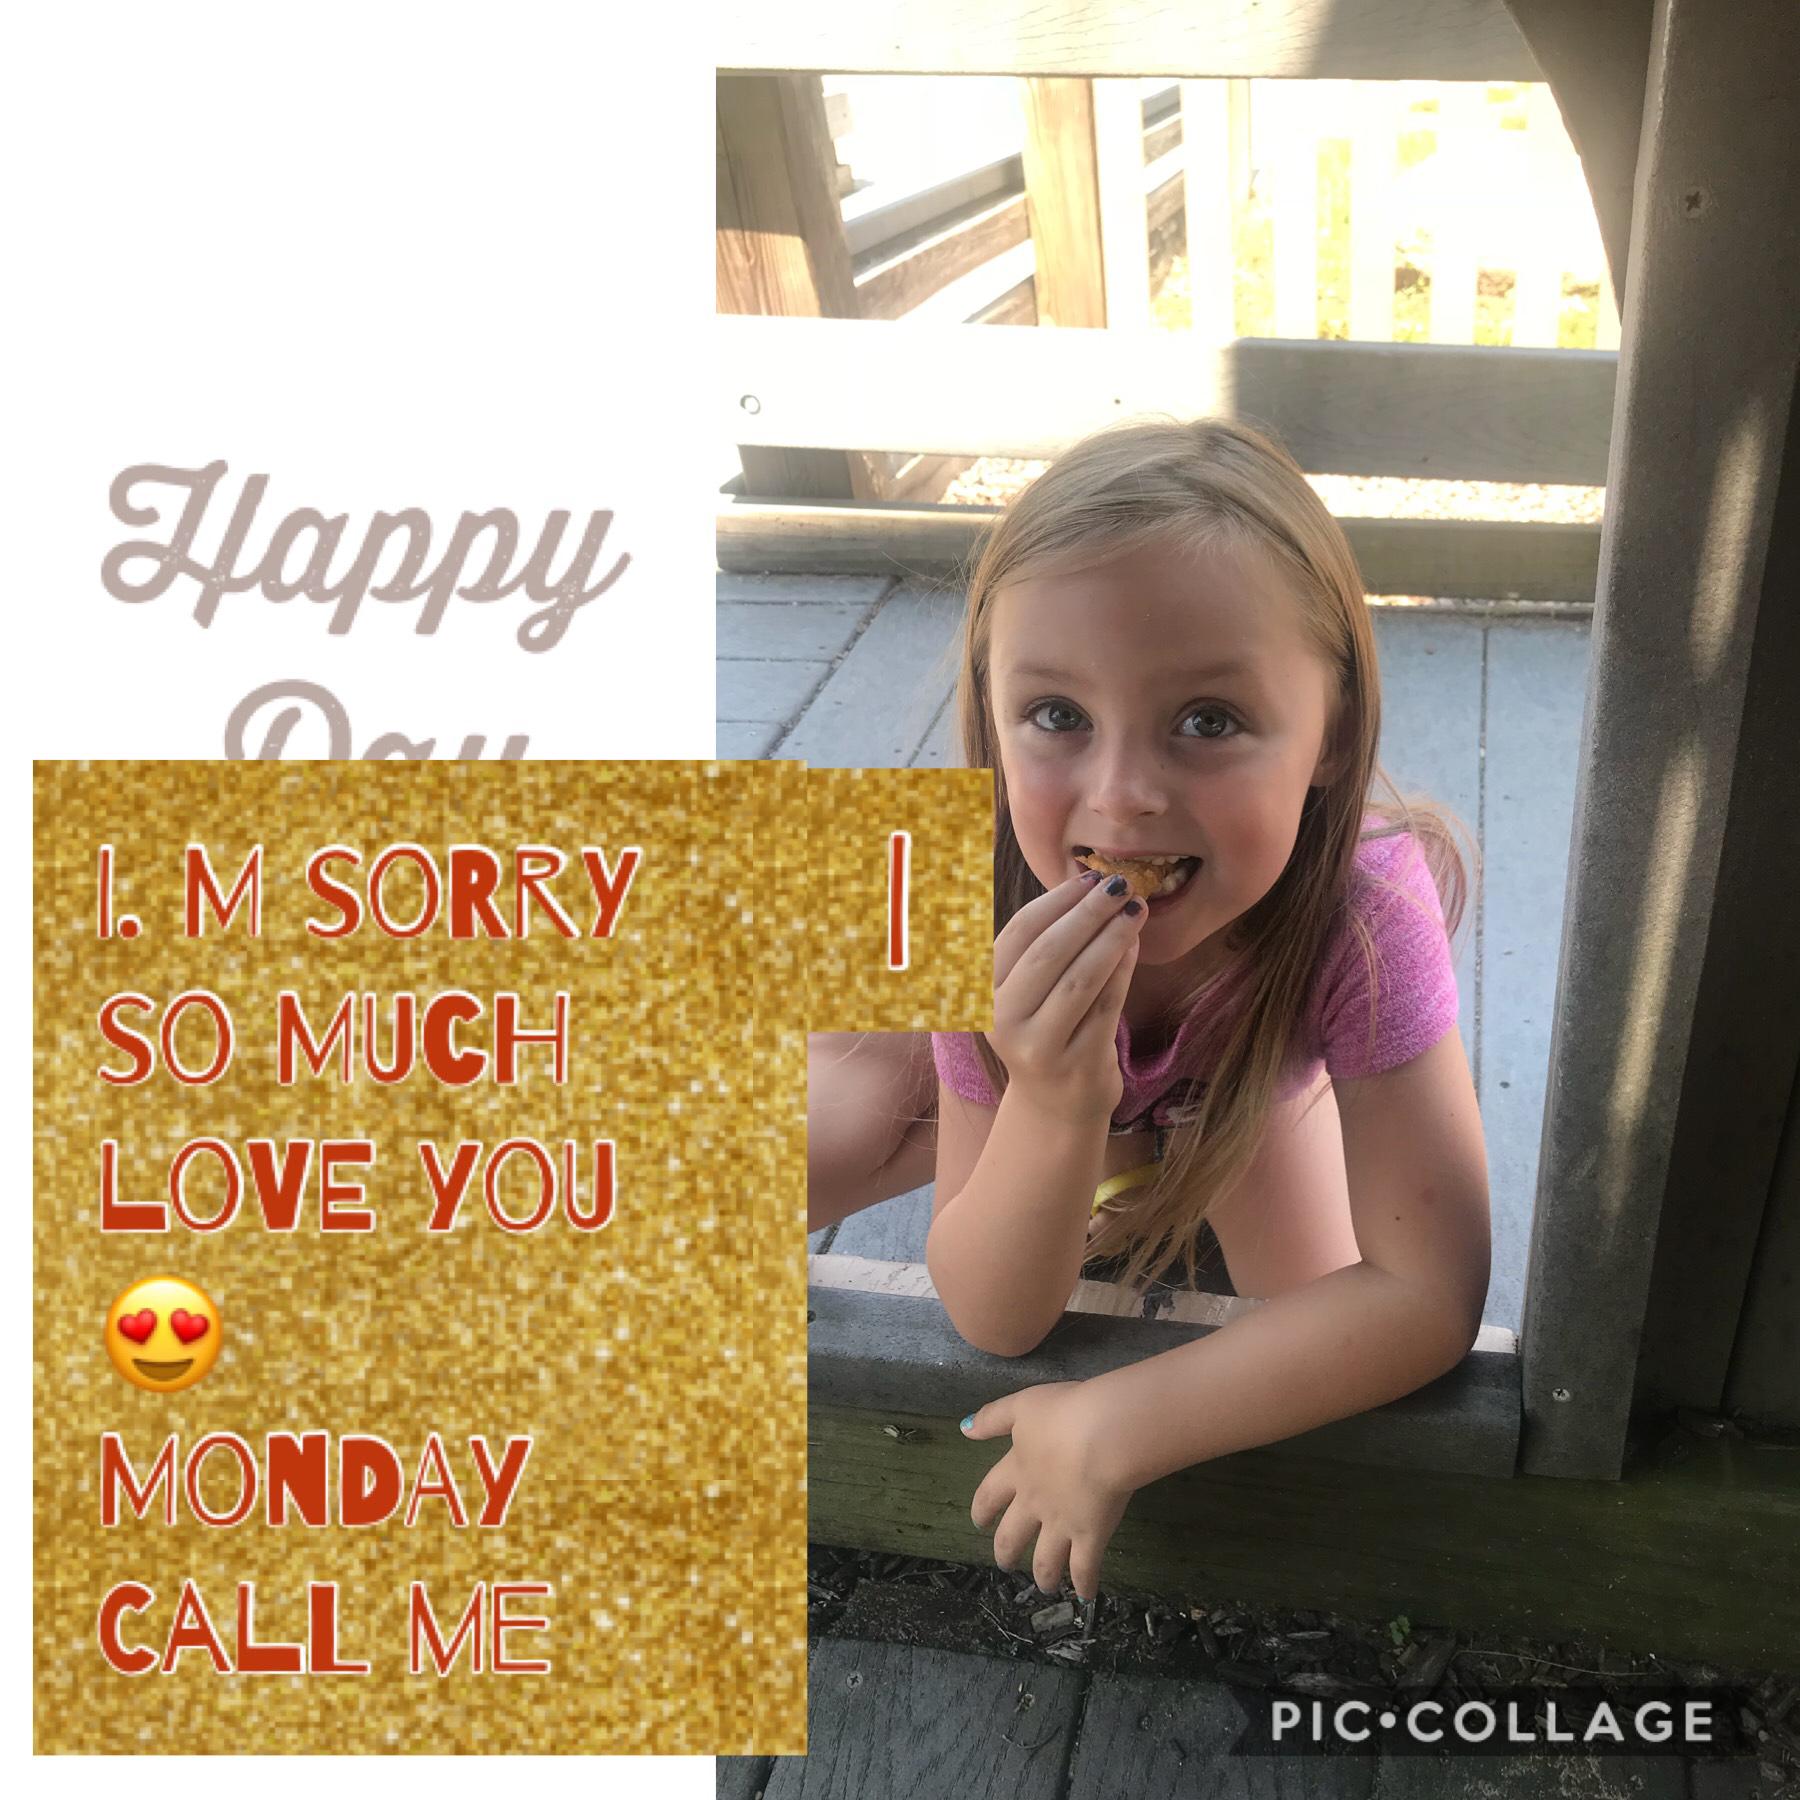 My sister  eat McDonald’s at the park she was so cute and lovers ❤️❤️❤️❤️❤️